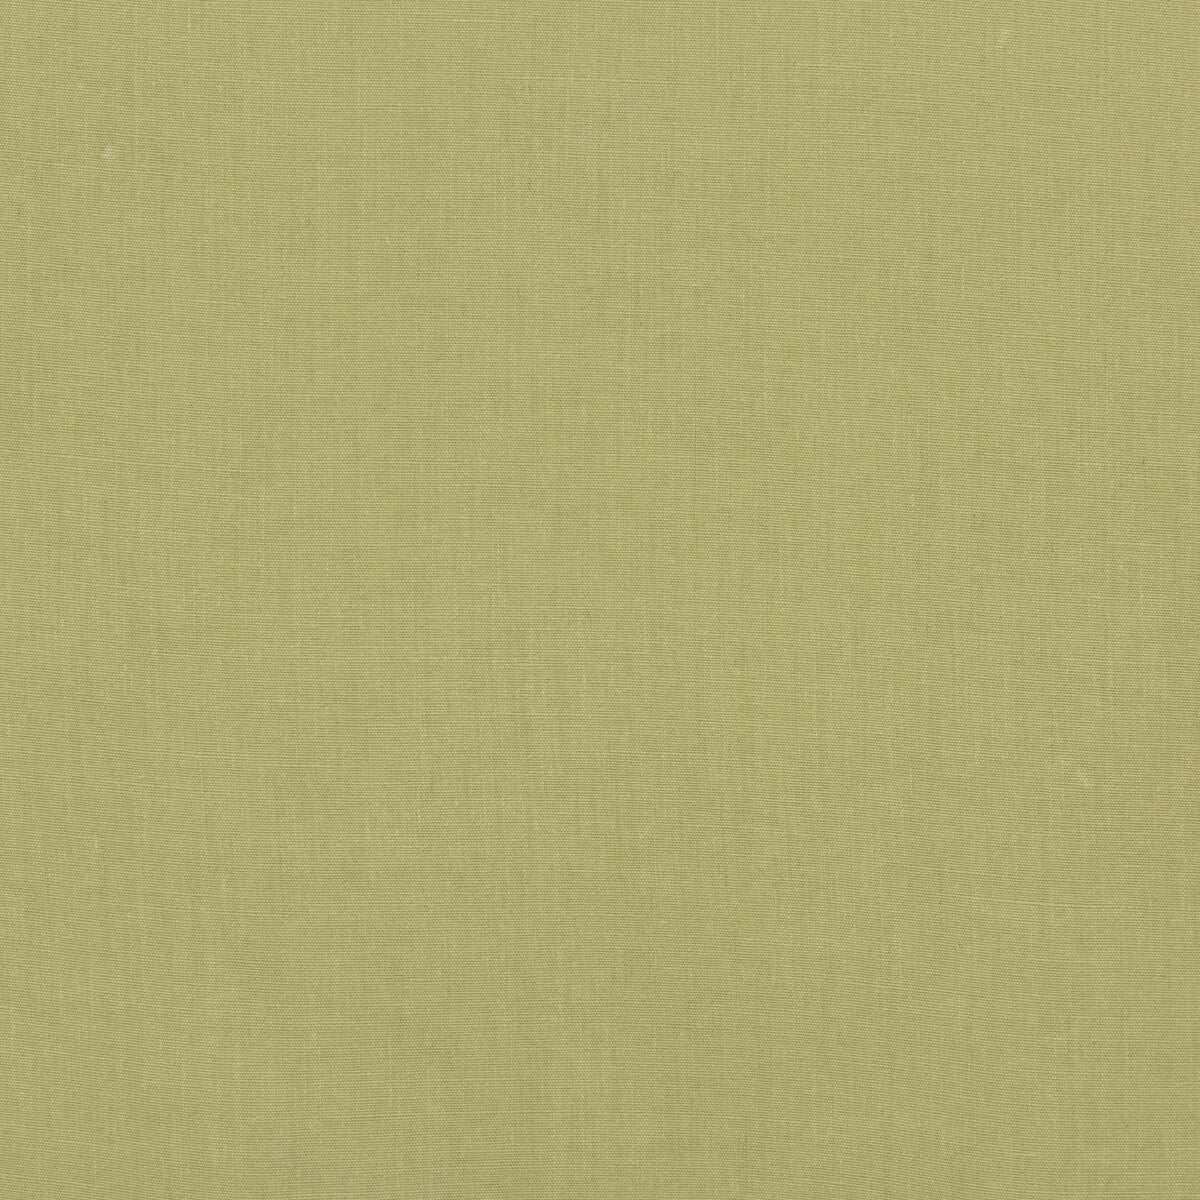 Meridian Linen fabric in celery color - pattern ED85281.761.0 - by Threads in the Meridian collection